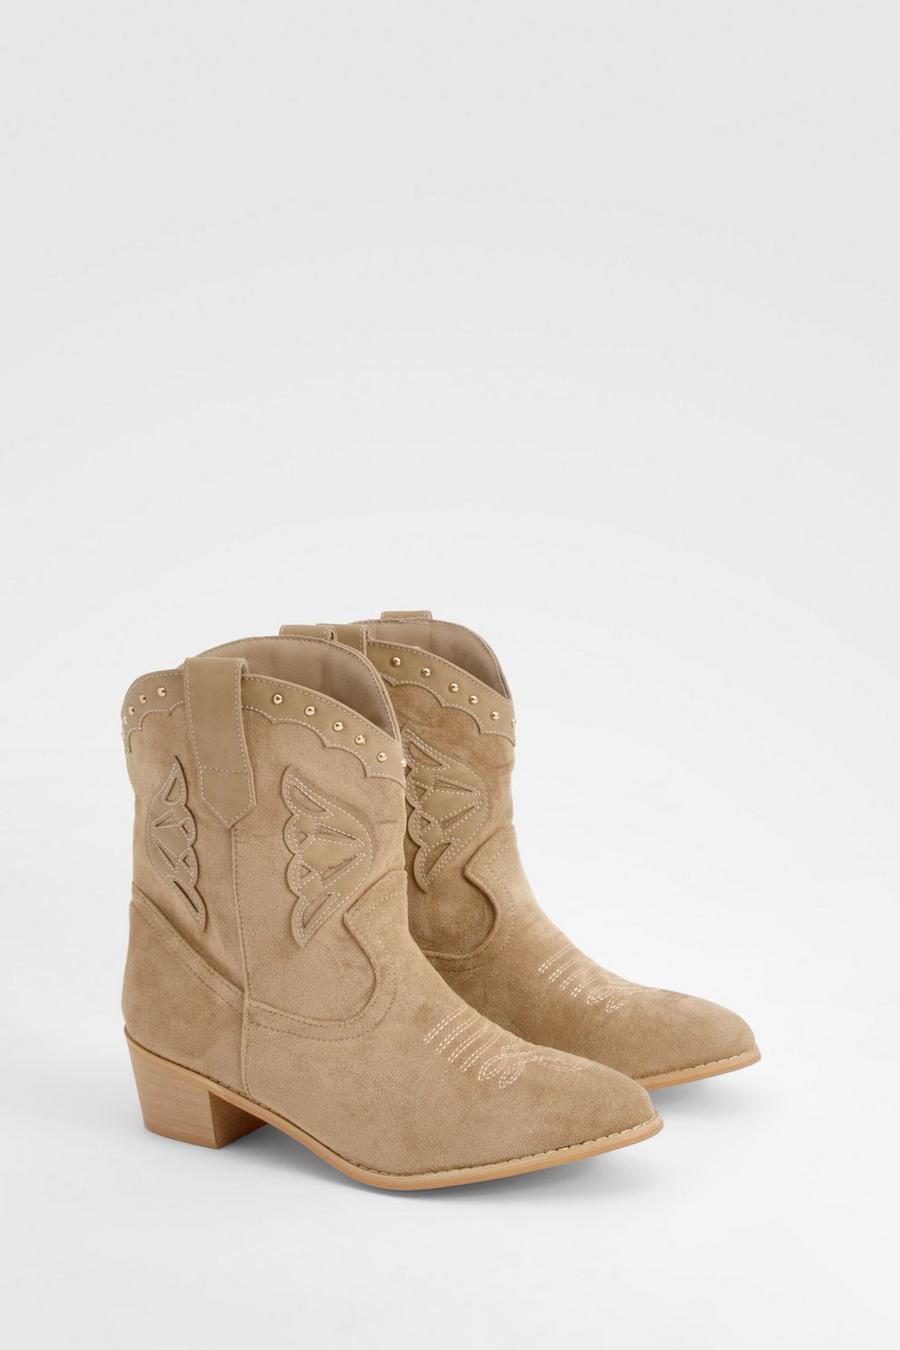 Taupe Studded Calf High Western Cowboy Boots